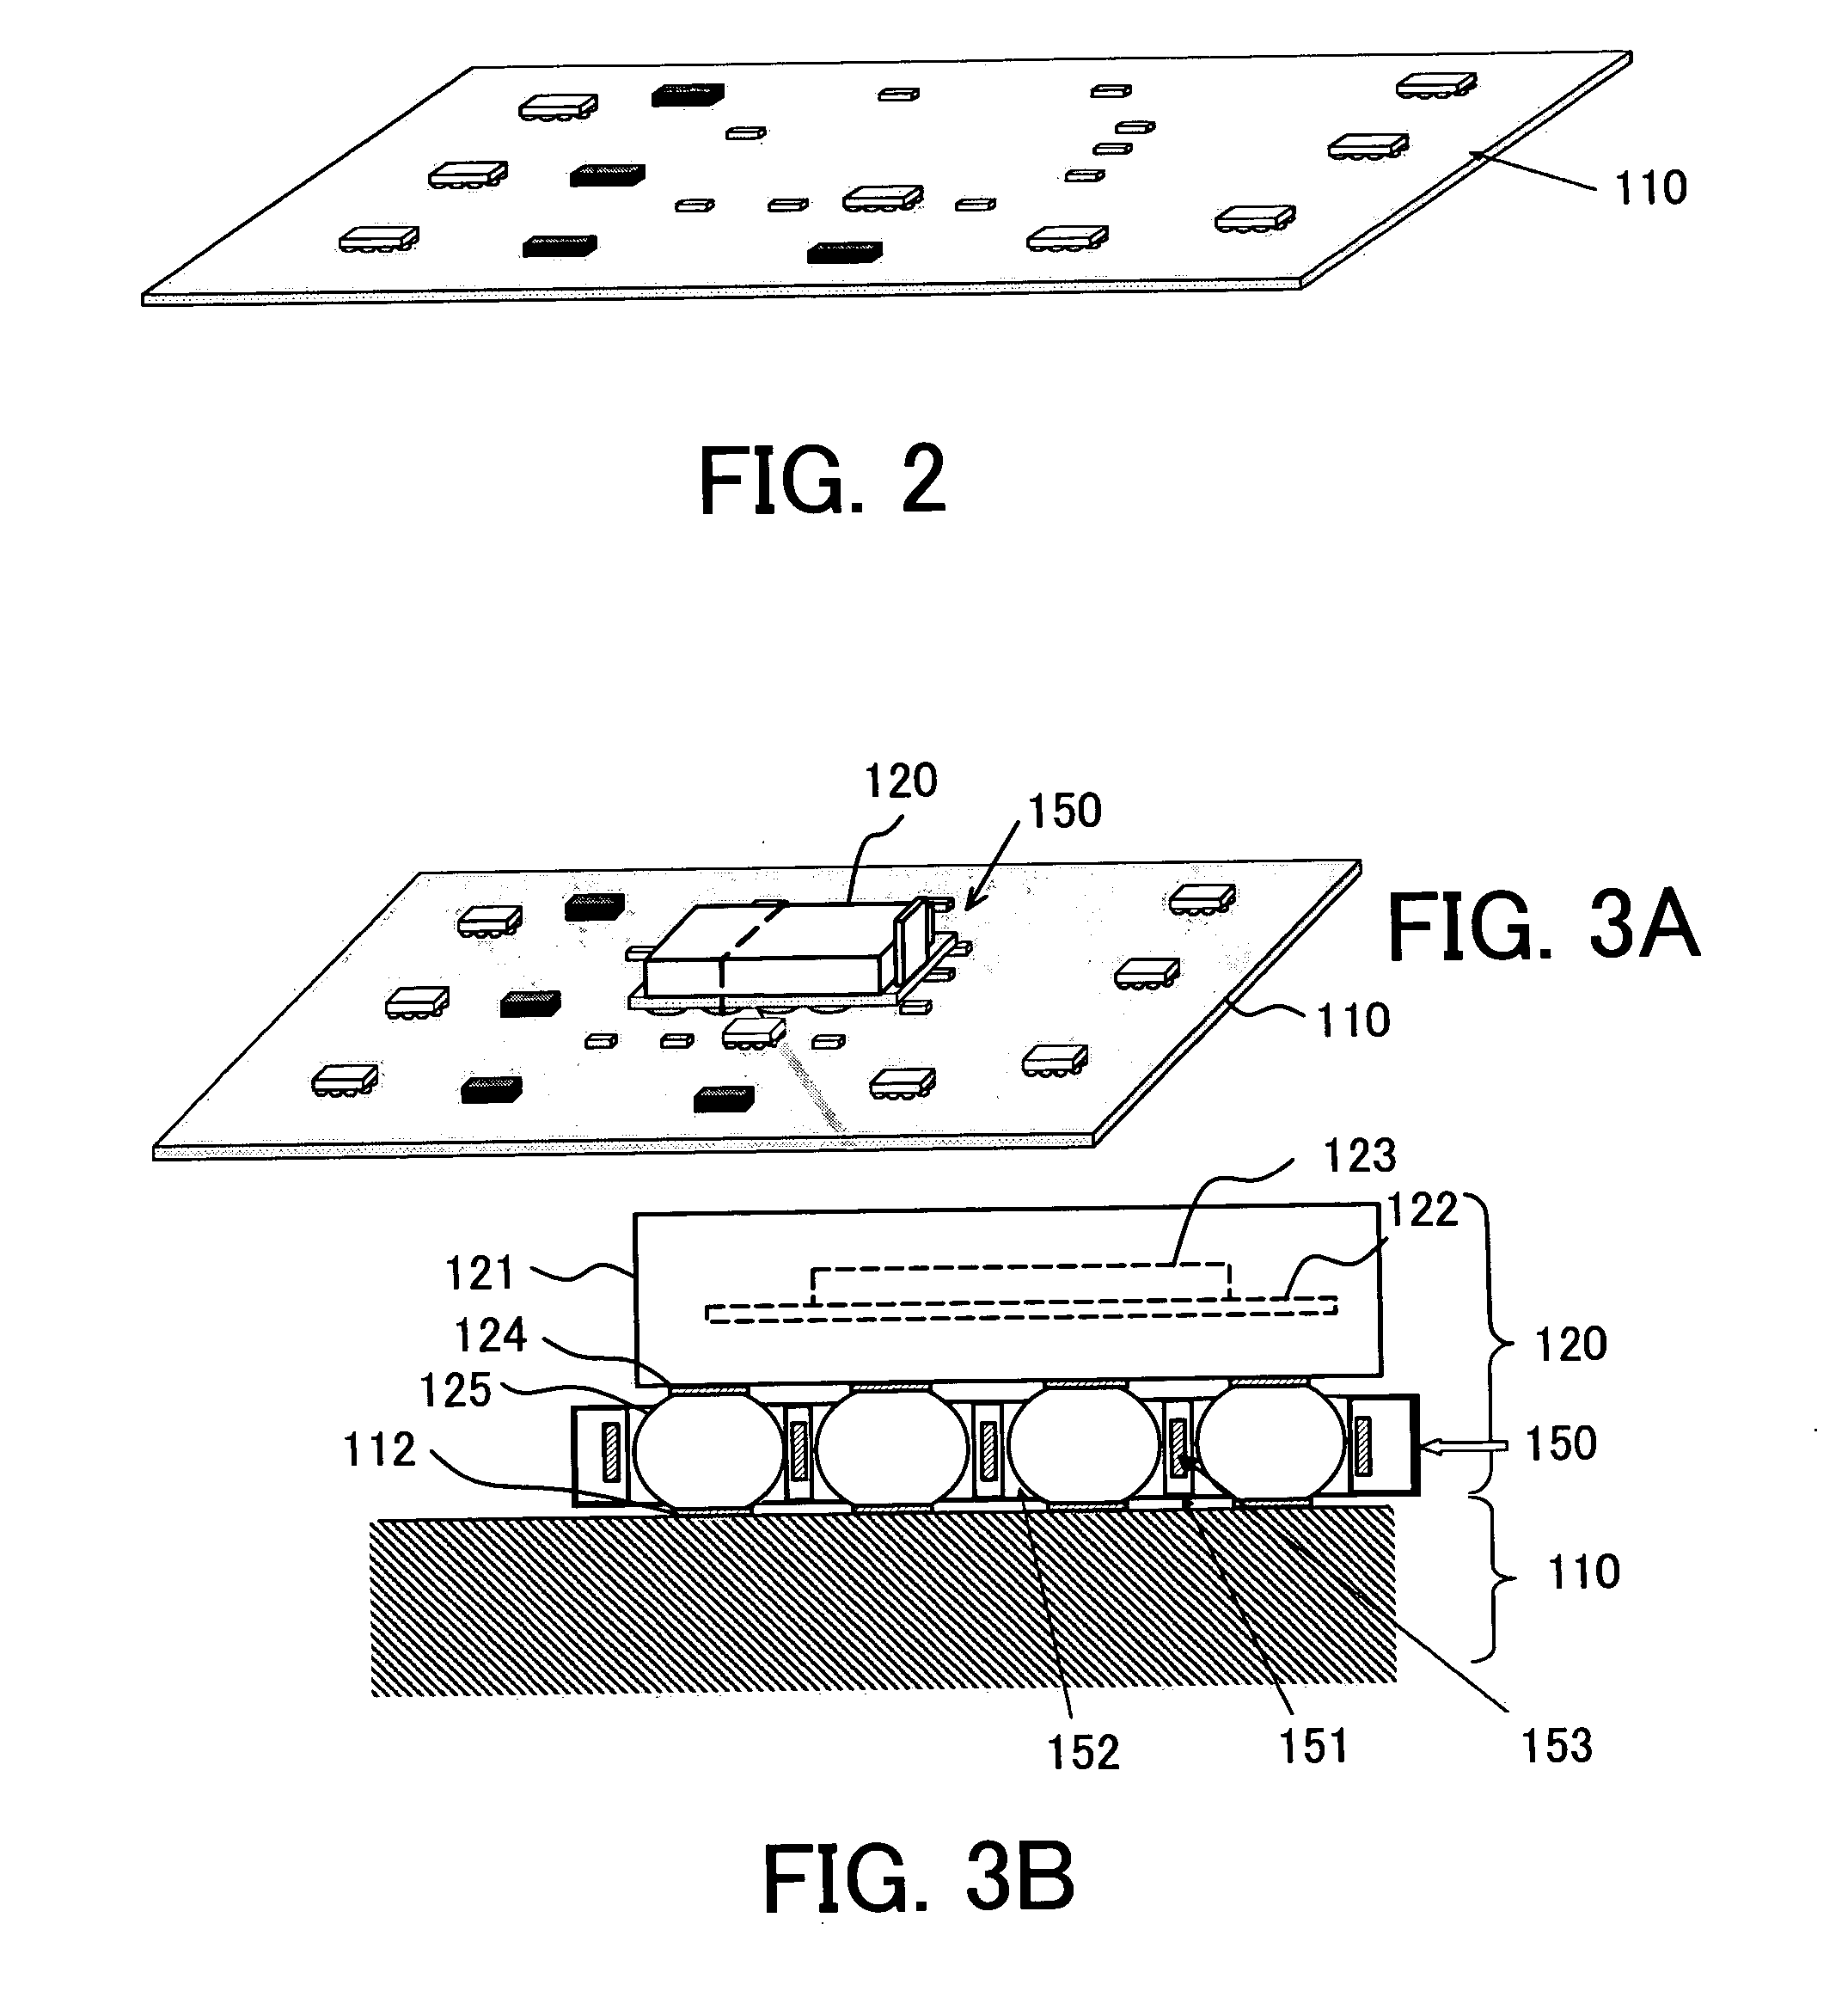 Heater that attaches electronic component to and detaches the same from substrate